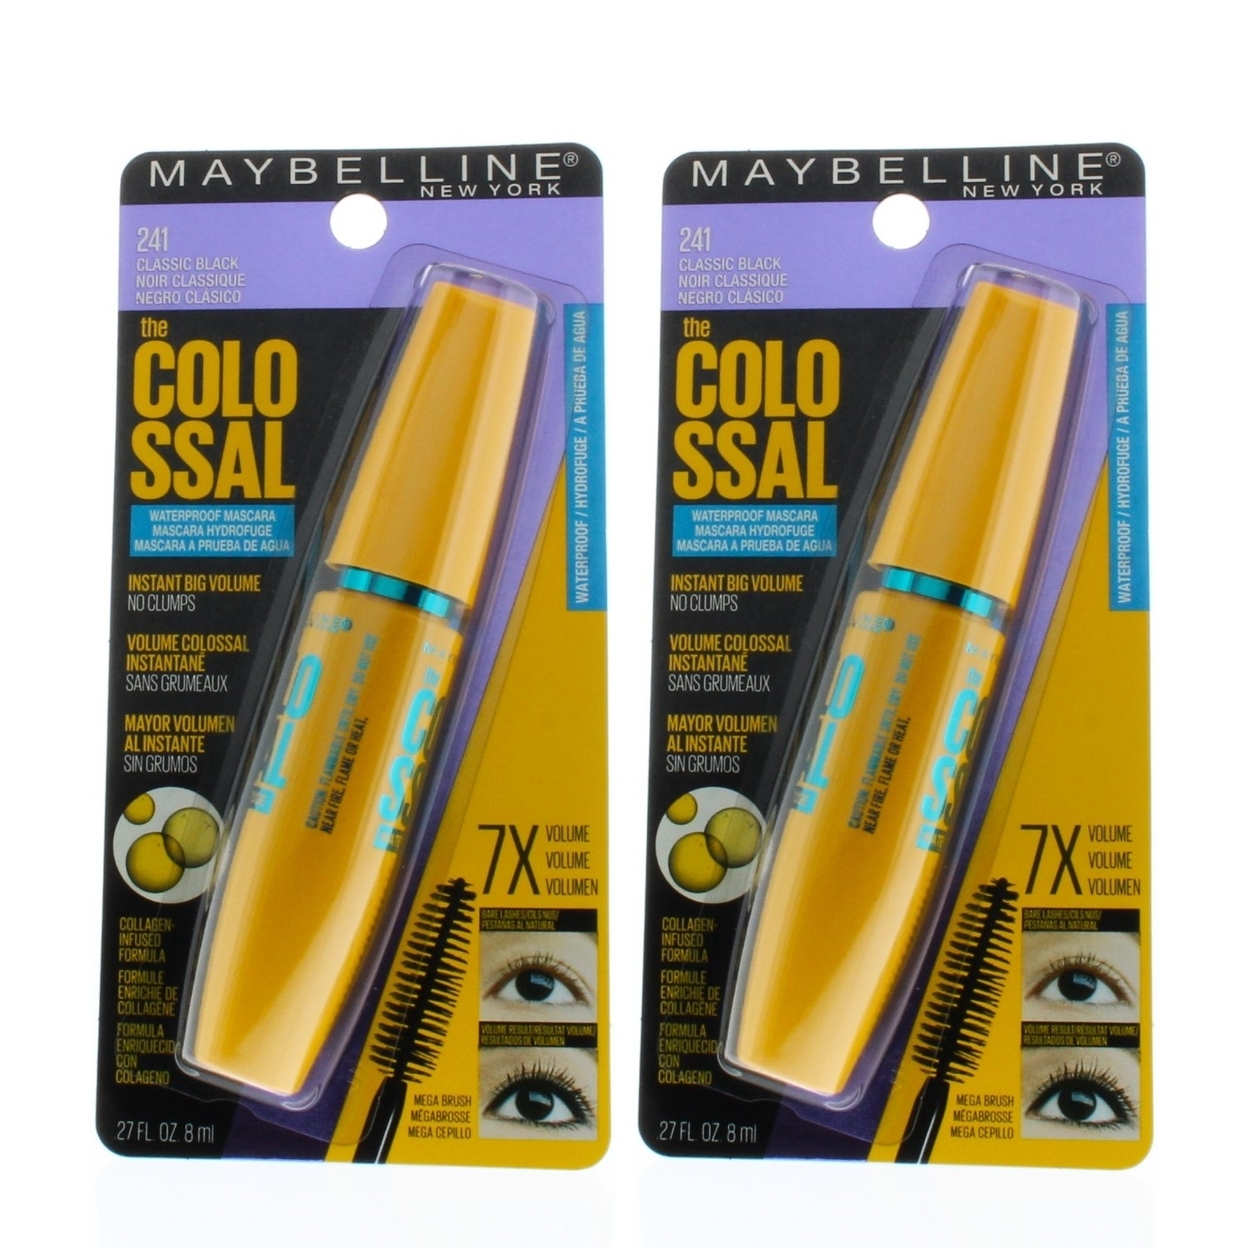 Maybelline Volum'Express The Colossal Mascara 241 Classic Black Waterproof 0.27oz/8ml (2 Pack)